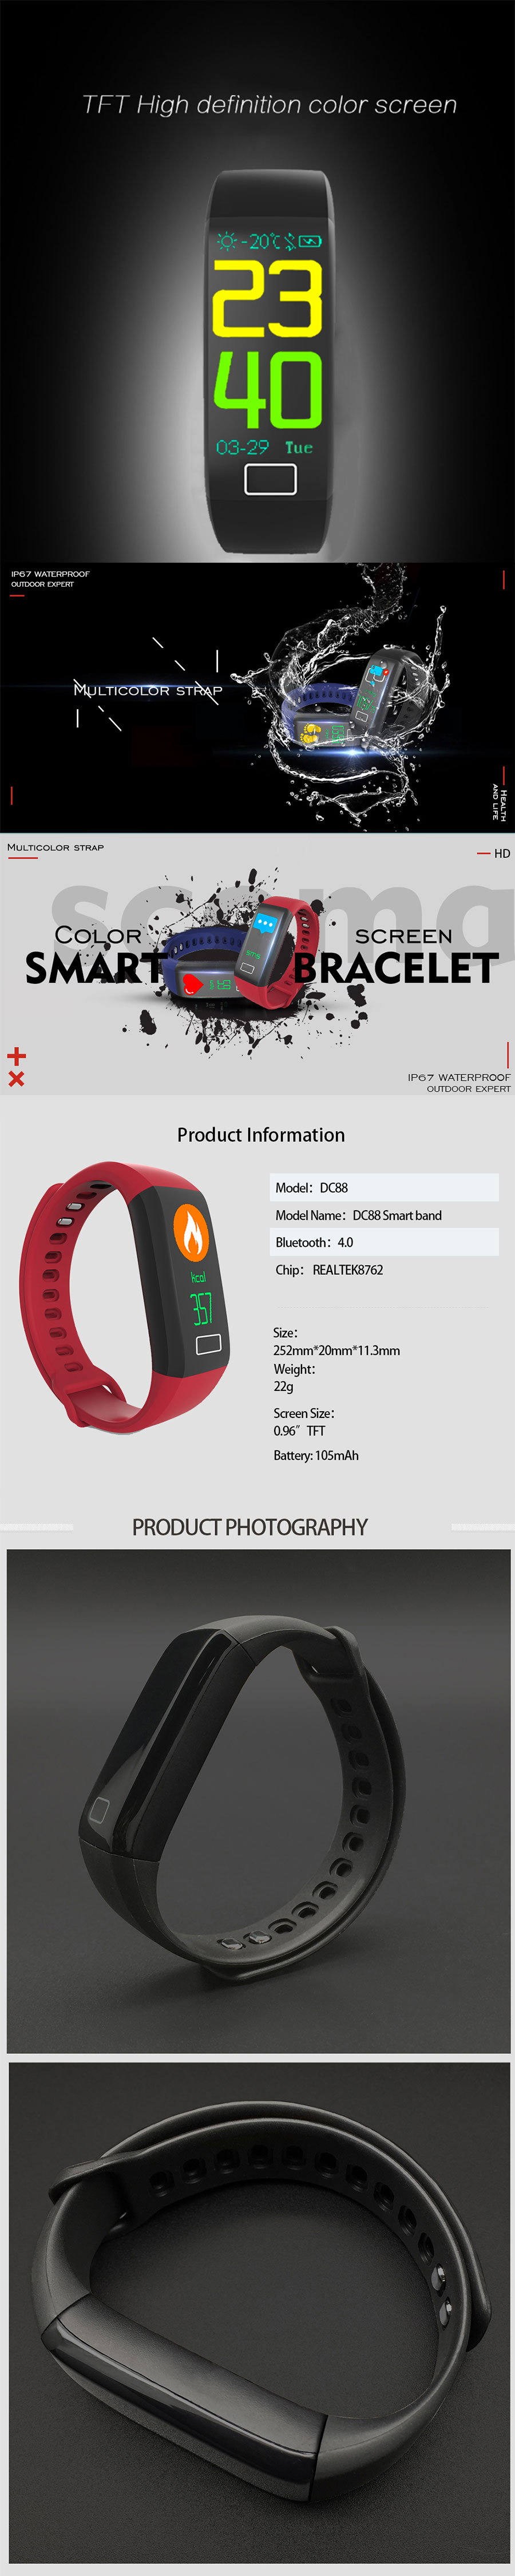 DC88-Smart-Bracelet-Heart-Rate-Blood-Pressure-Monitor-Smart-Watch-Step-Counter-for-Android-IOS-1280420